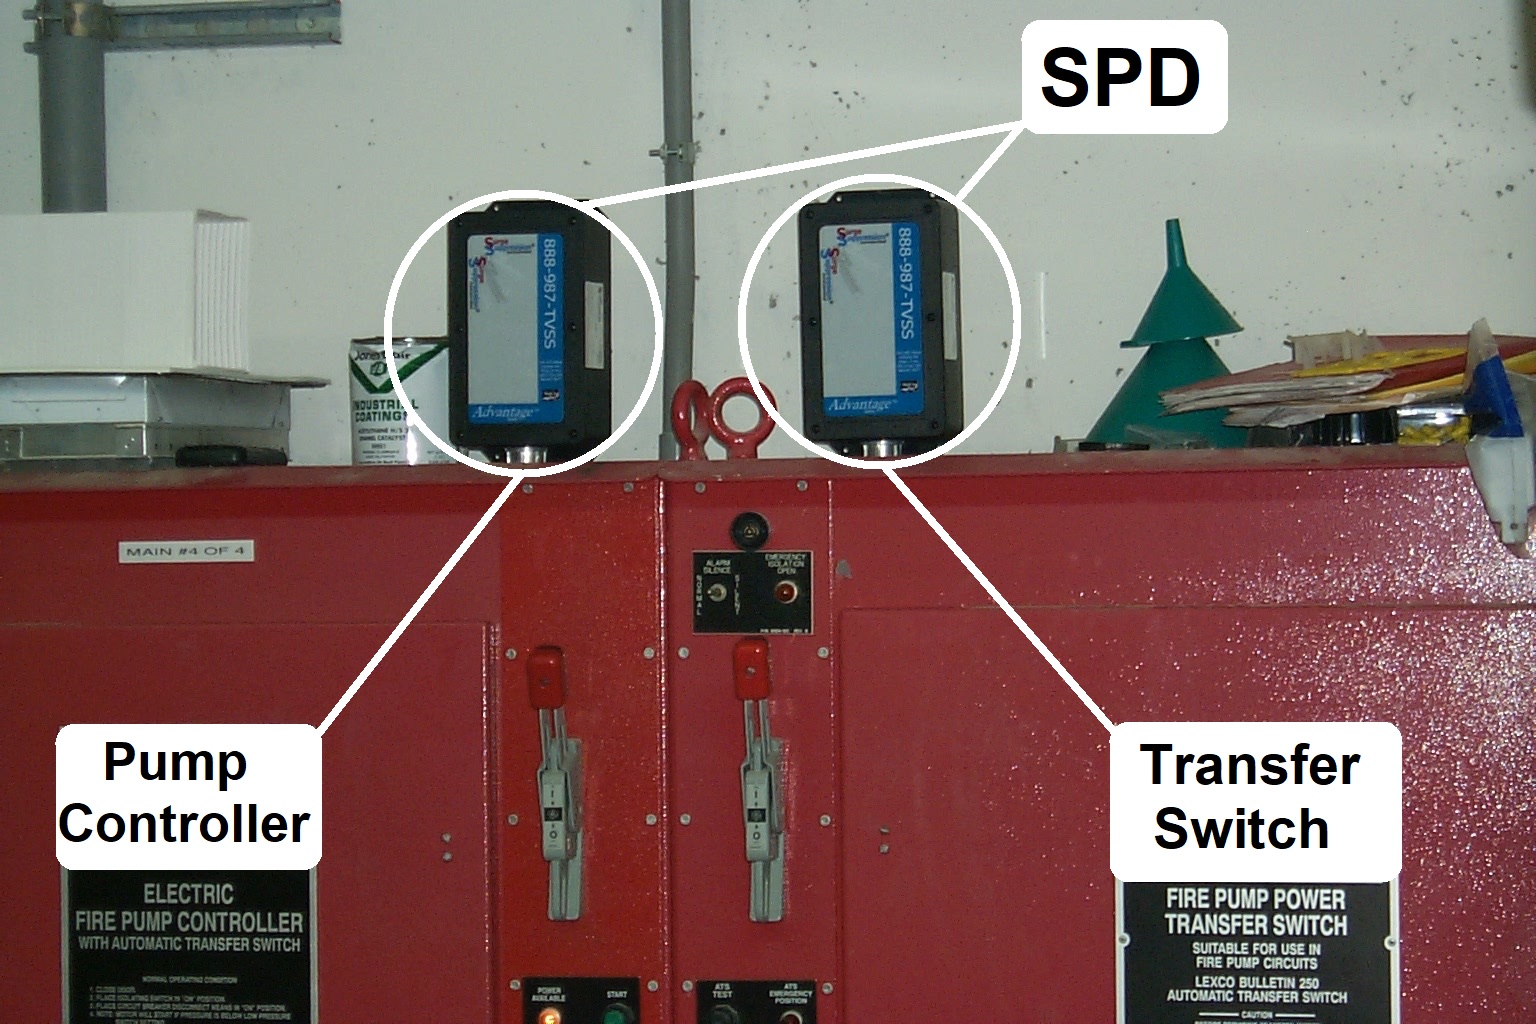 Fire Pump Controllers are critical and sensitive life-safety equipment. Use High Quality, High Performance SPDs for the Right Protection Results. Get the Right Gear!